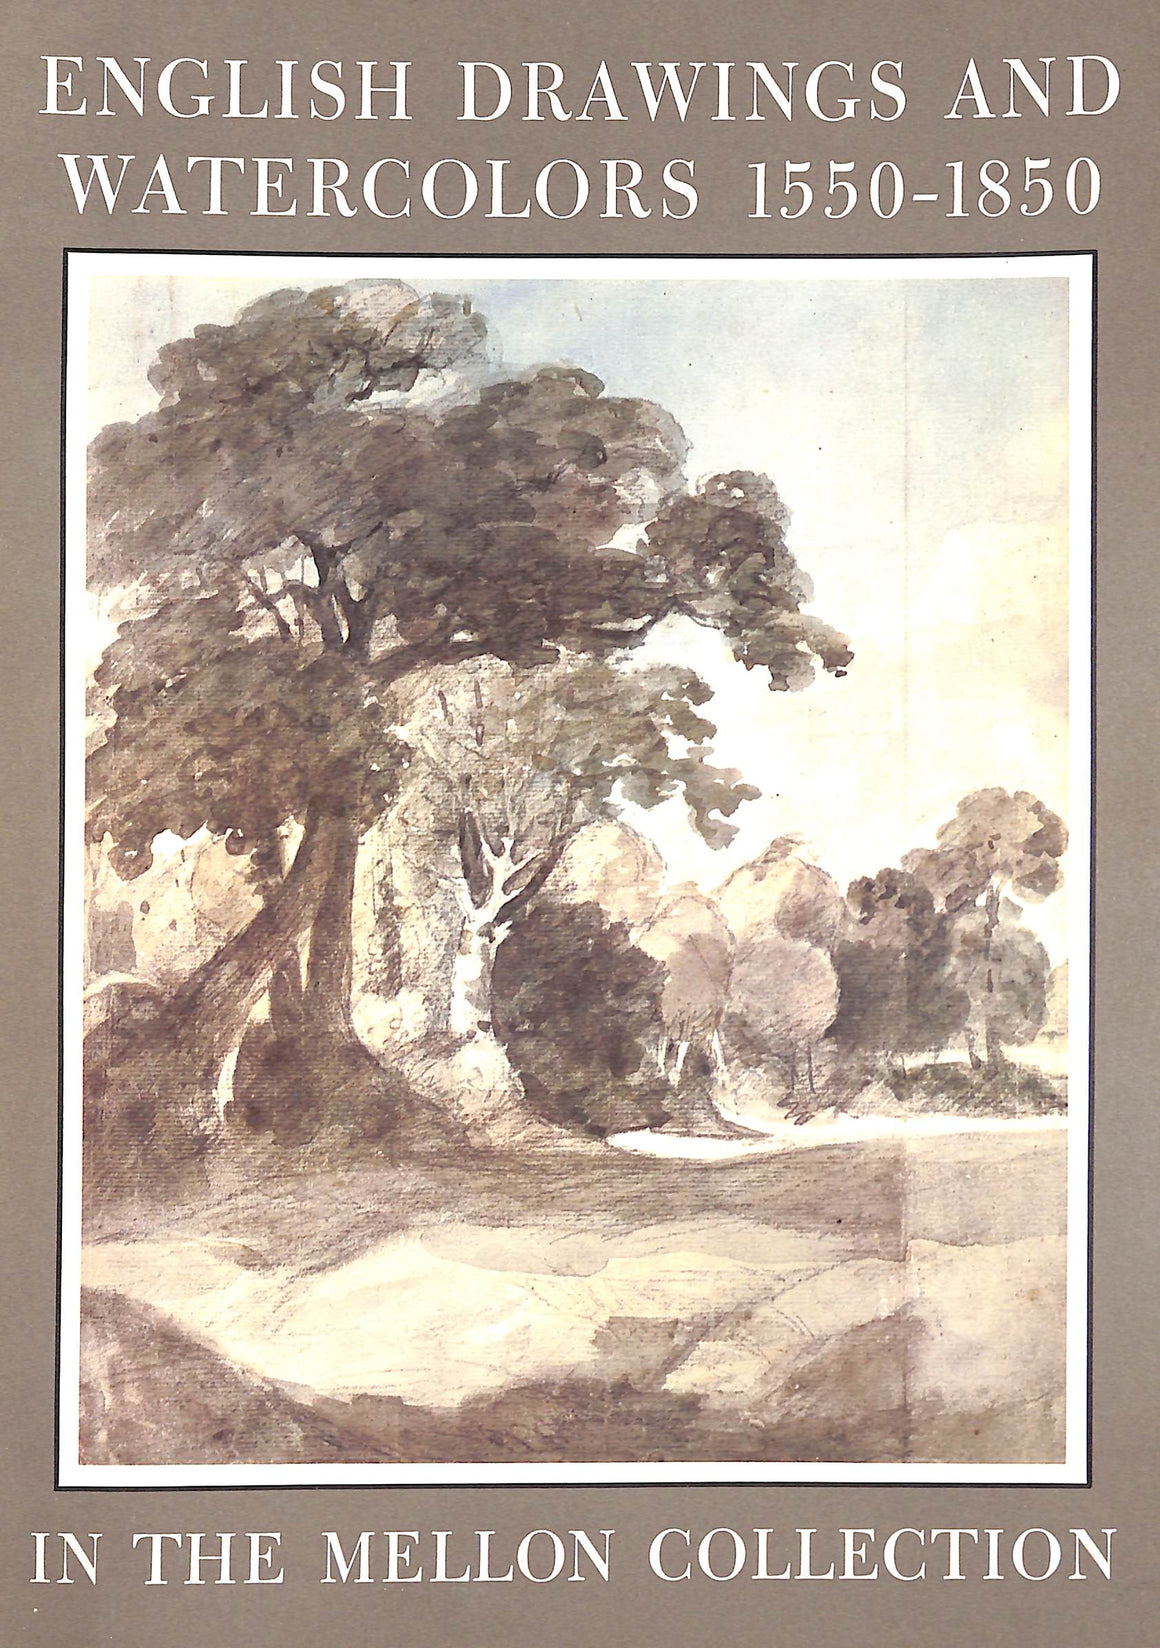 "English Drawings and Watercolors 1550-1850 In The Collection Of Mr. and Mrs. Paul Mellon" 1972 BASKETT, John and SNELGROVE, Dudley